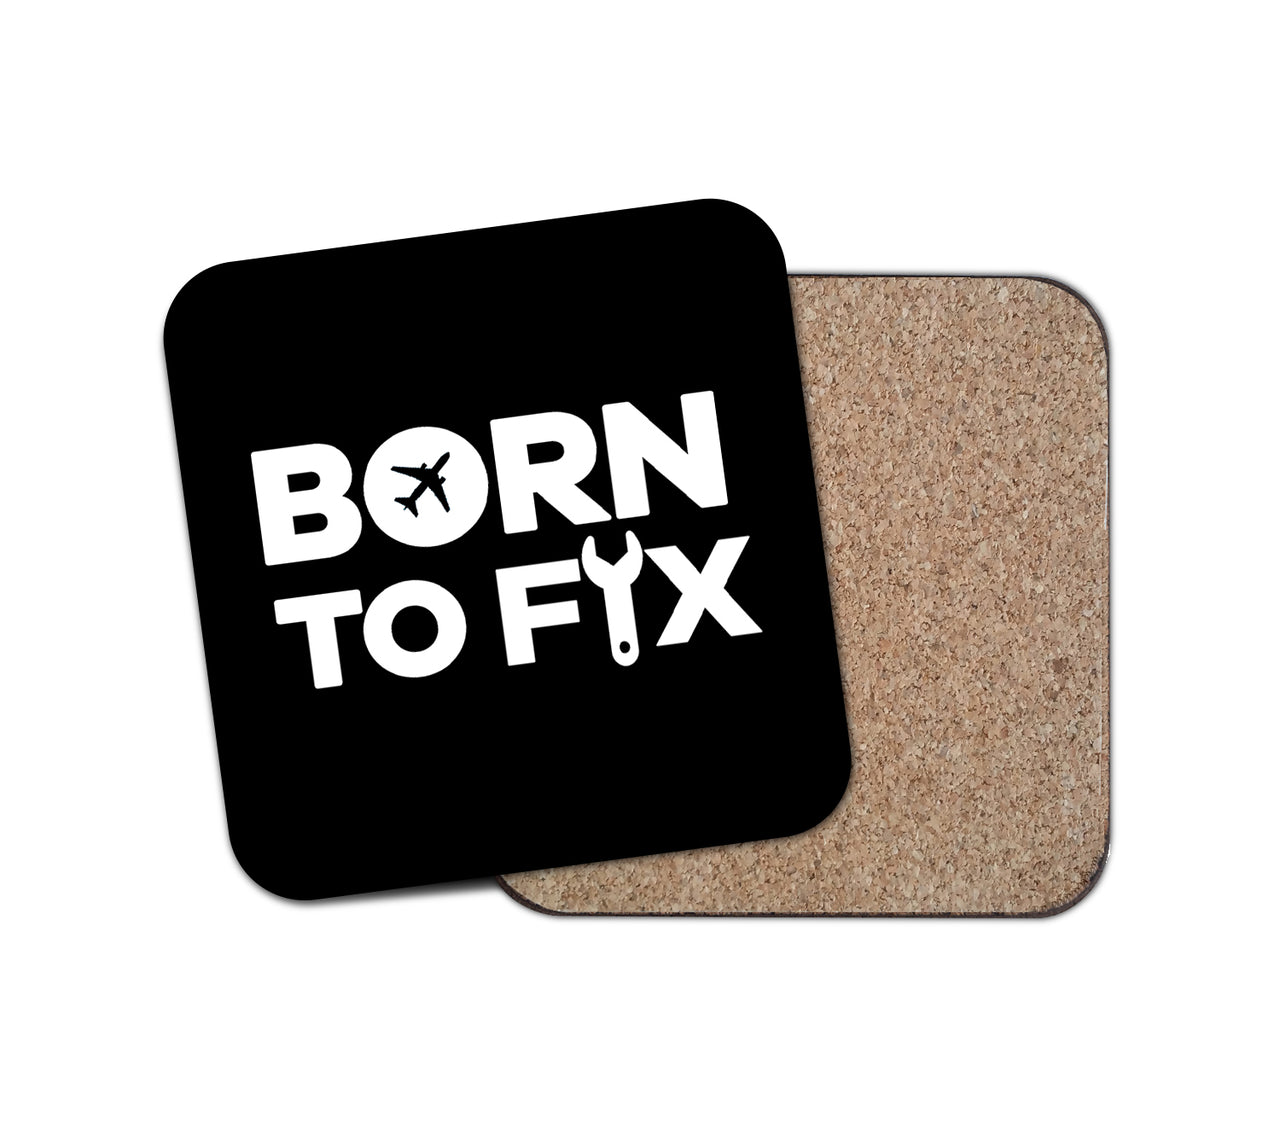 Born To Fix Airplanes Designed Coasters